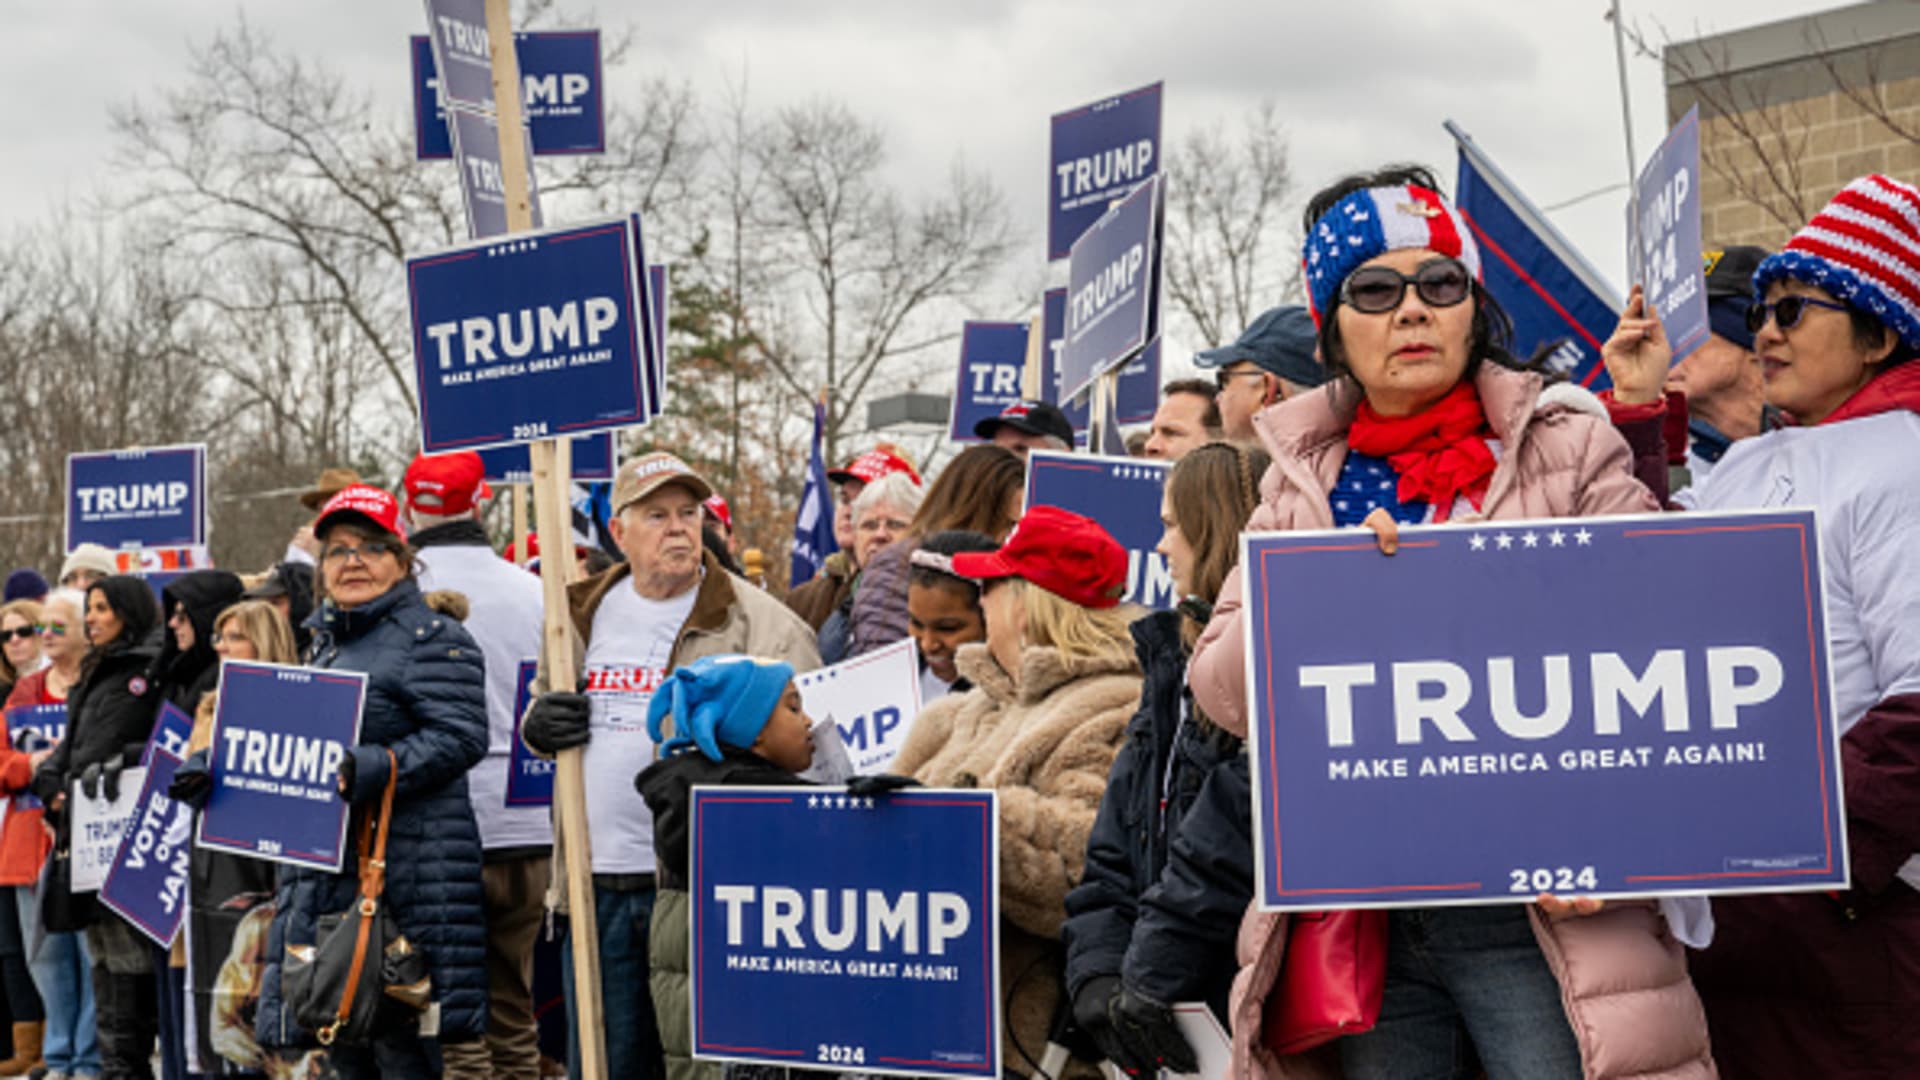 Trump supporters wait together ahead of Republican presidential candidate and former President Donald Trump's visit to the Londonderry High School polling station on January 23, 2024 in Londonderry, New Hampshire.